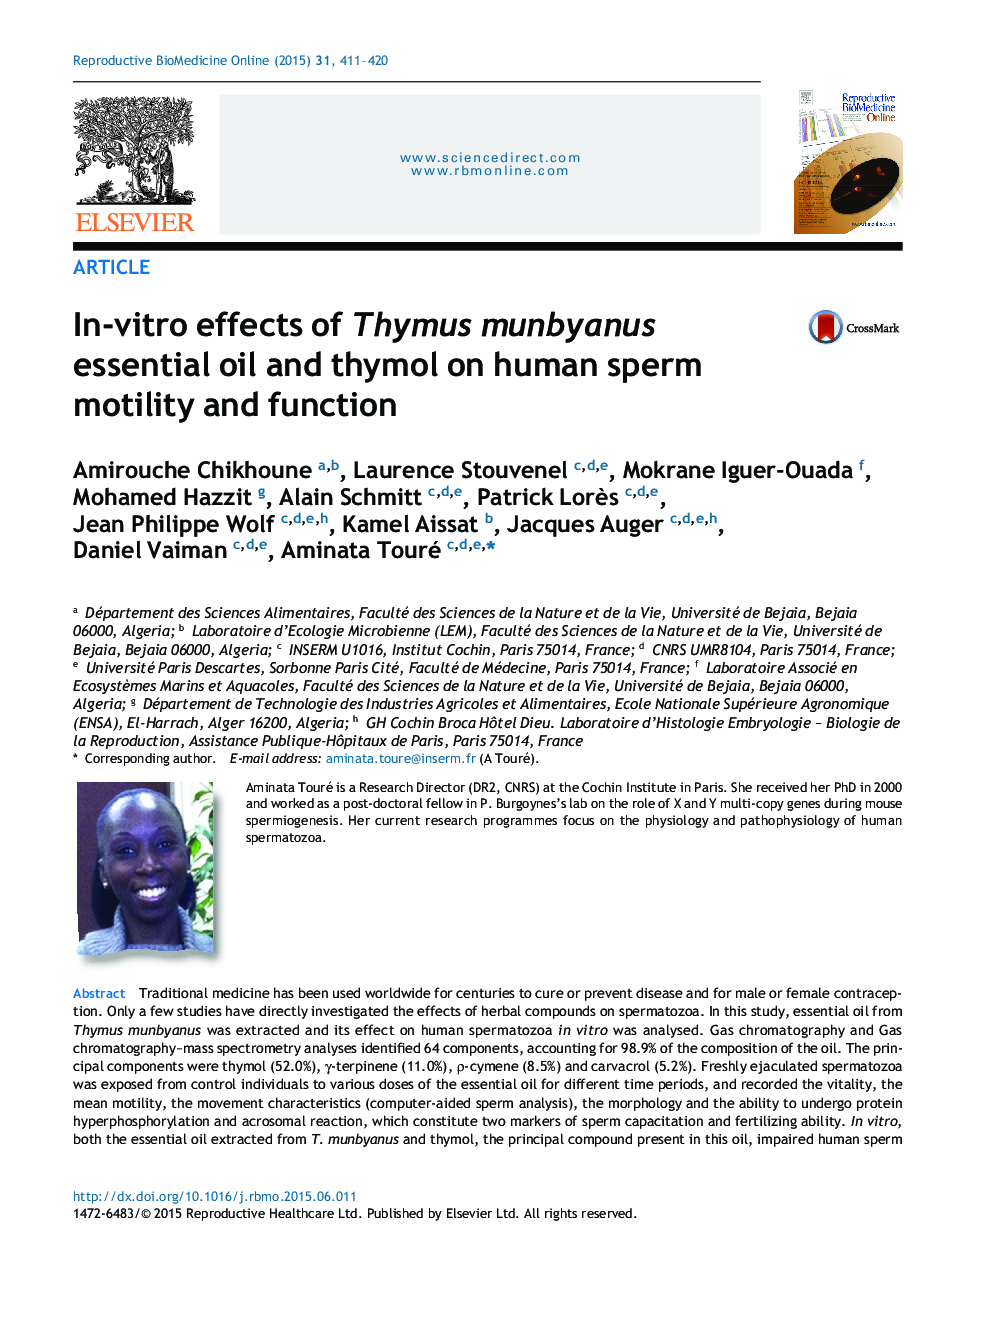 In-vitro effects of Thymus munbyanus essential oil and thymol on human sperm motility and function